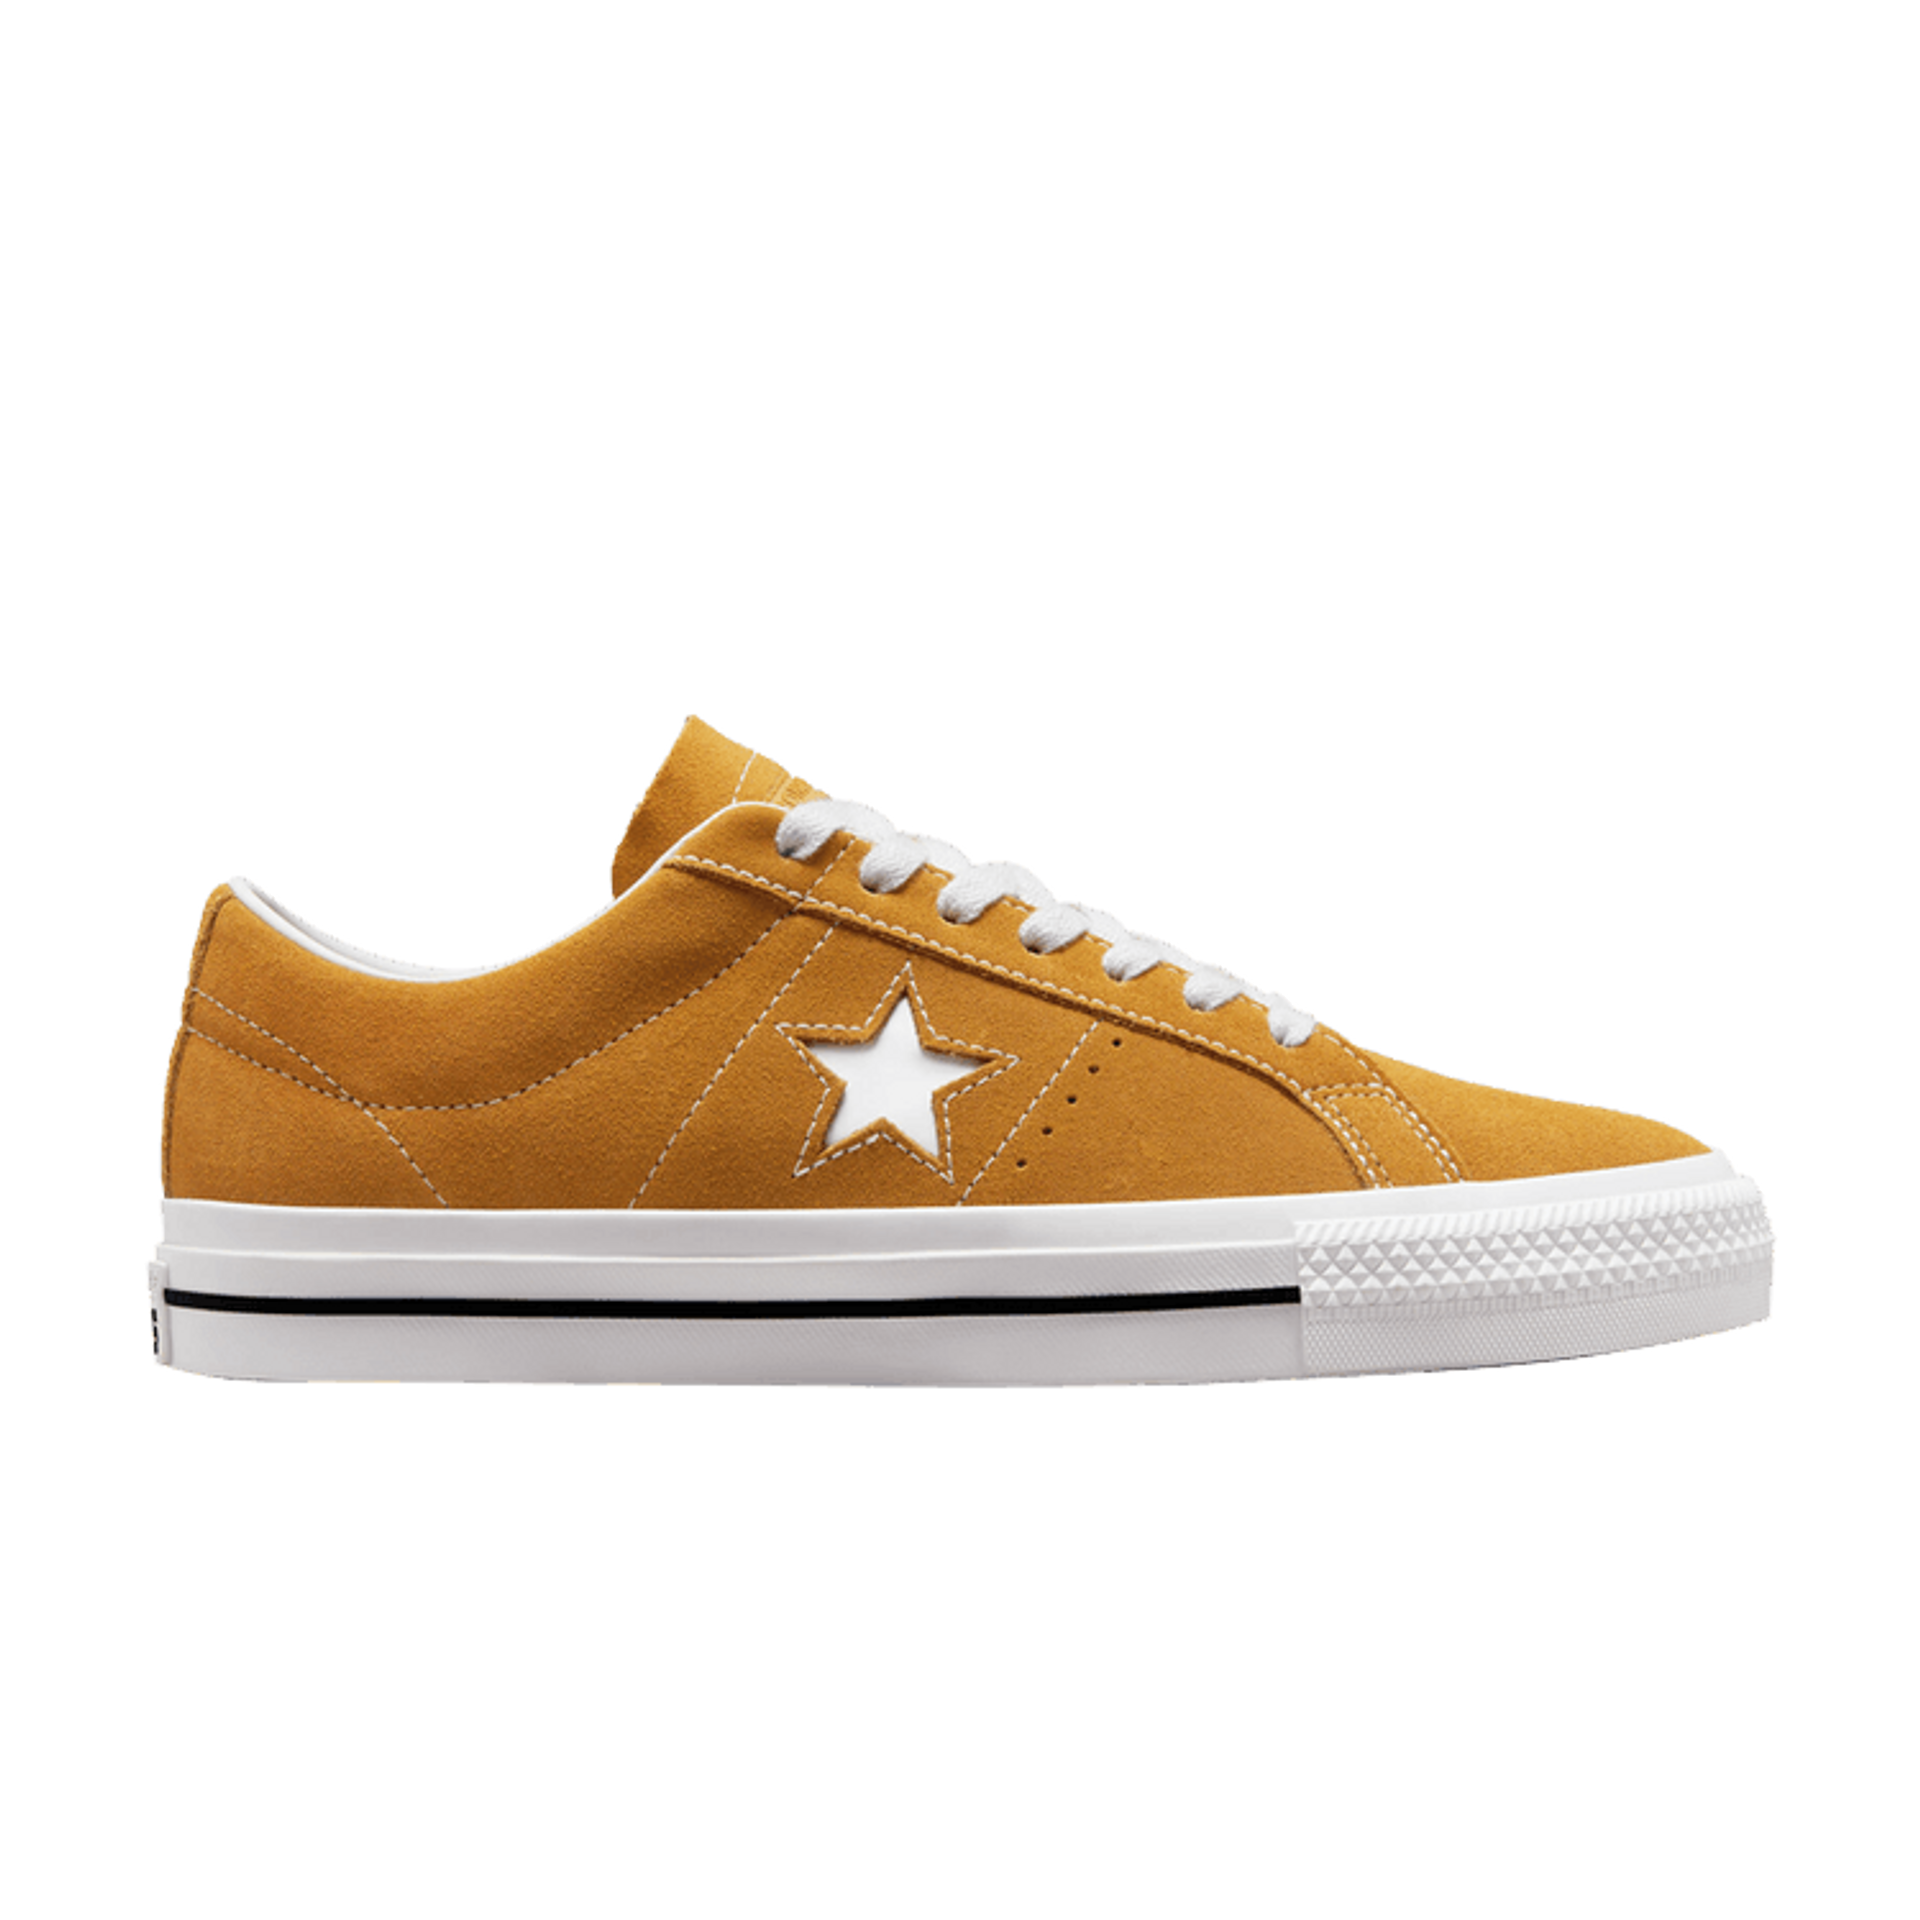 Converse One Star Pro Cons Low '90s Block - Wheat'